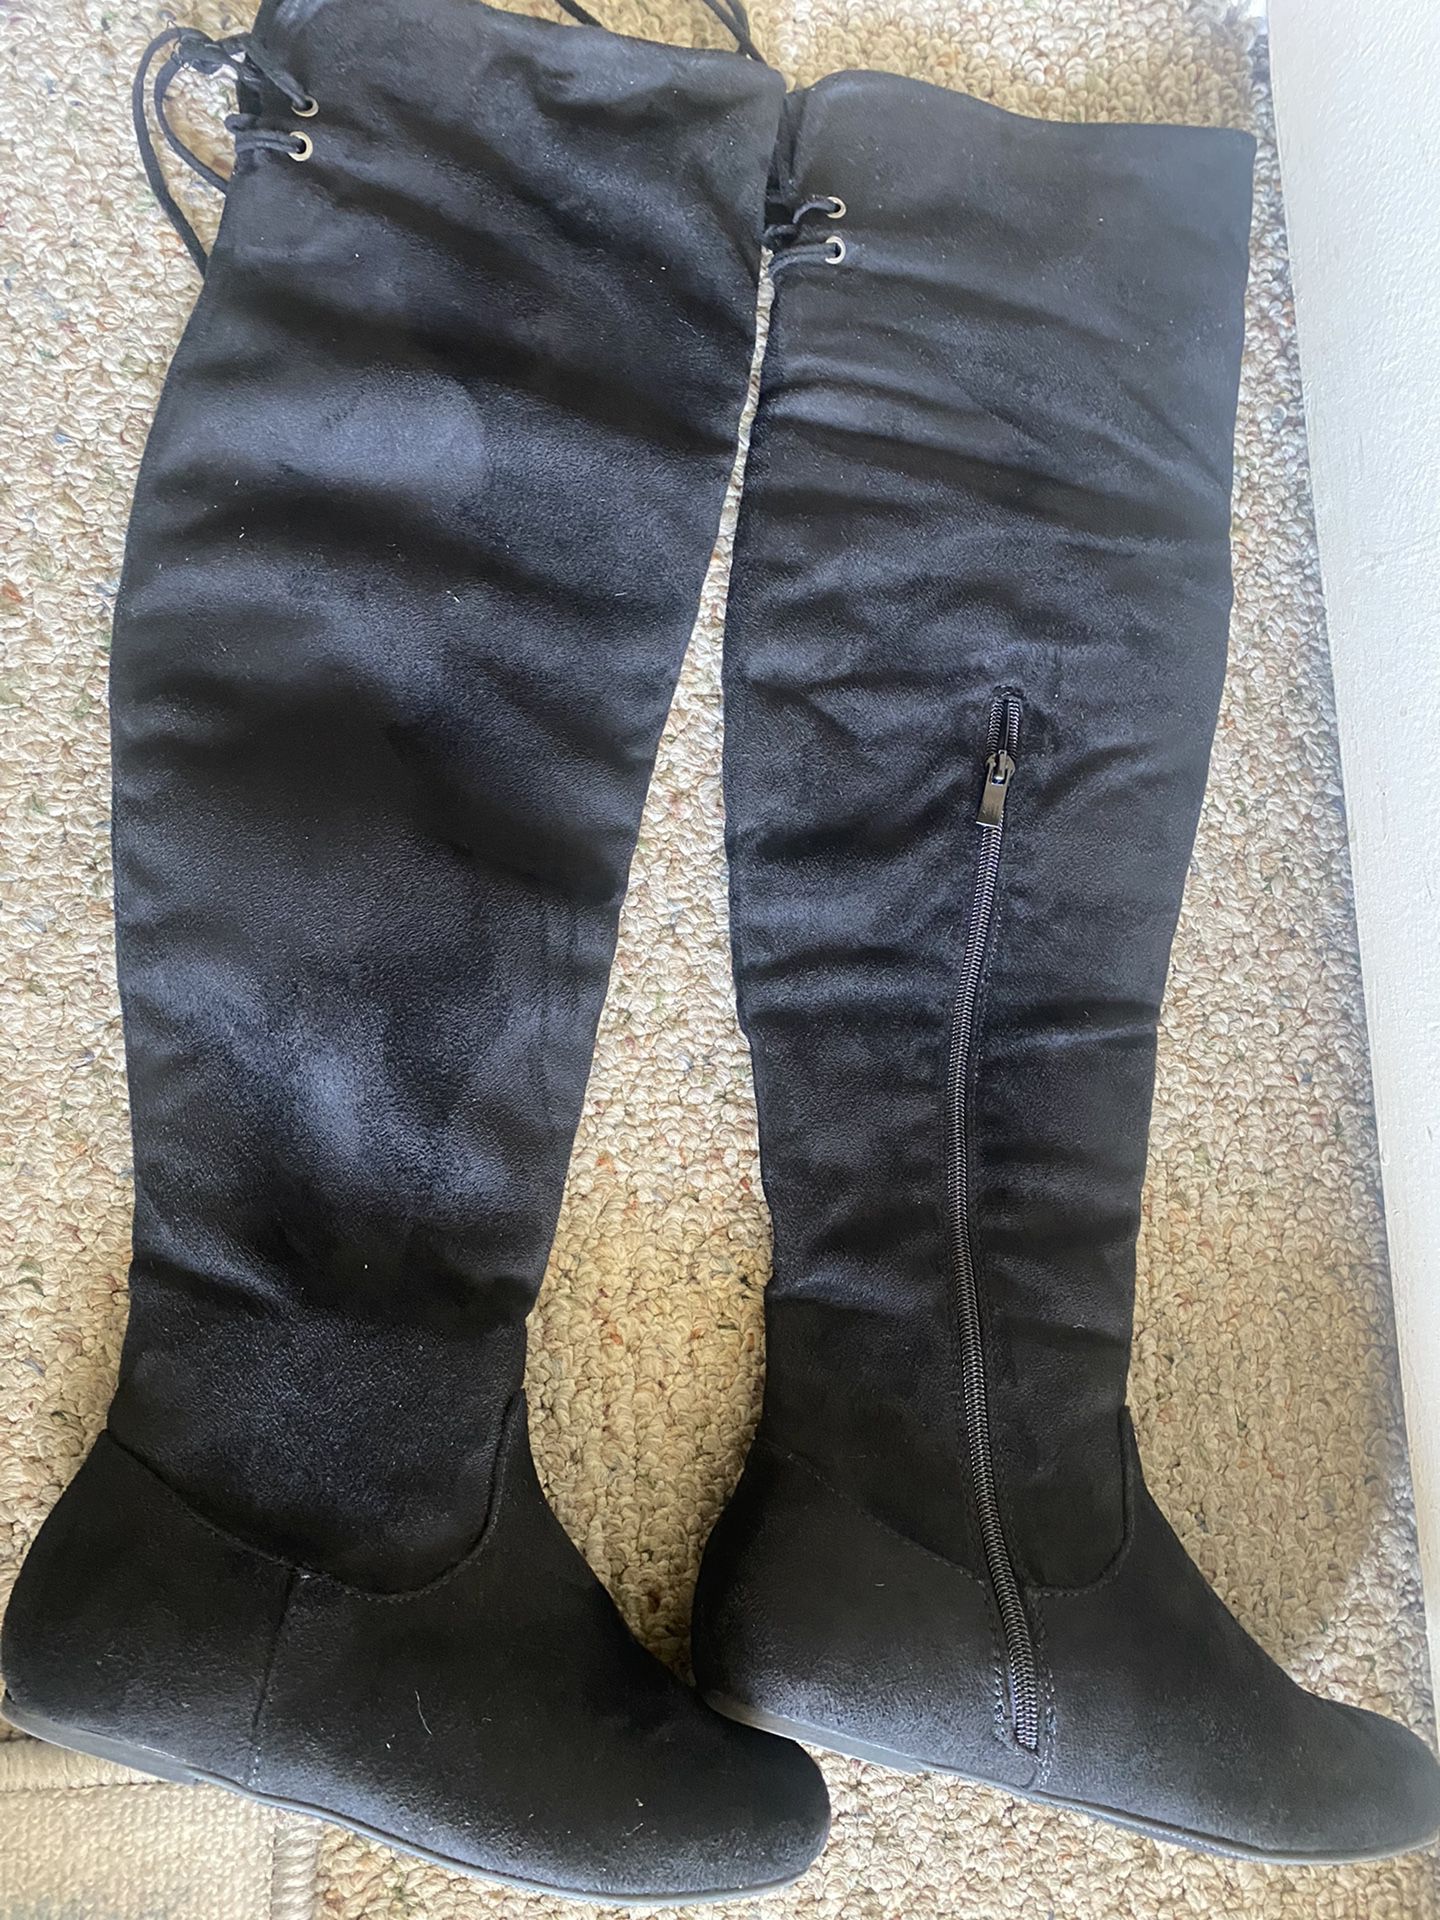 Black Boots Size:5 /1/2For Women 